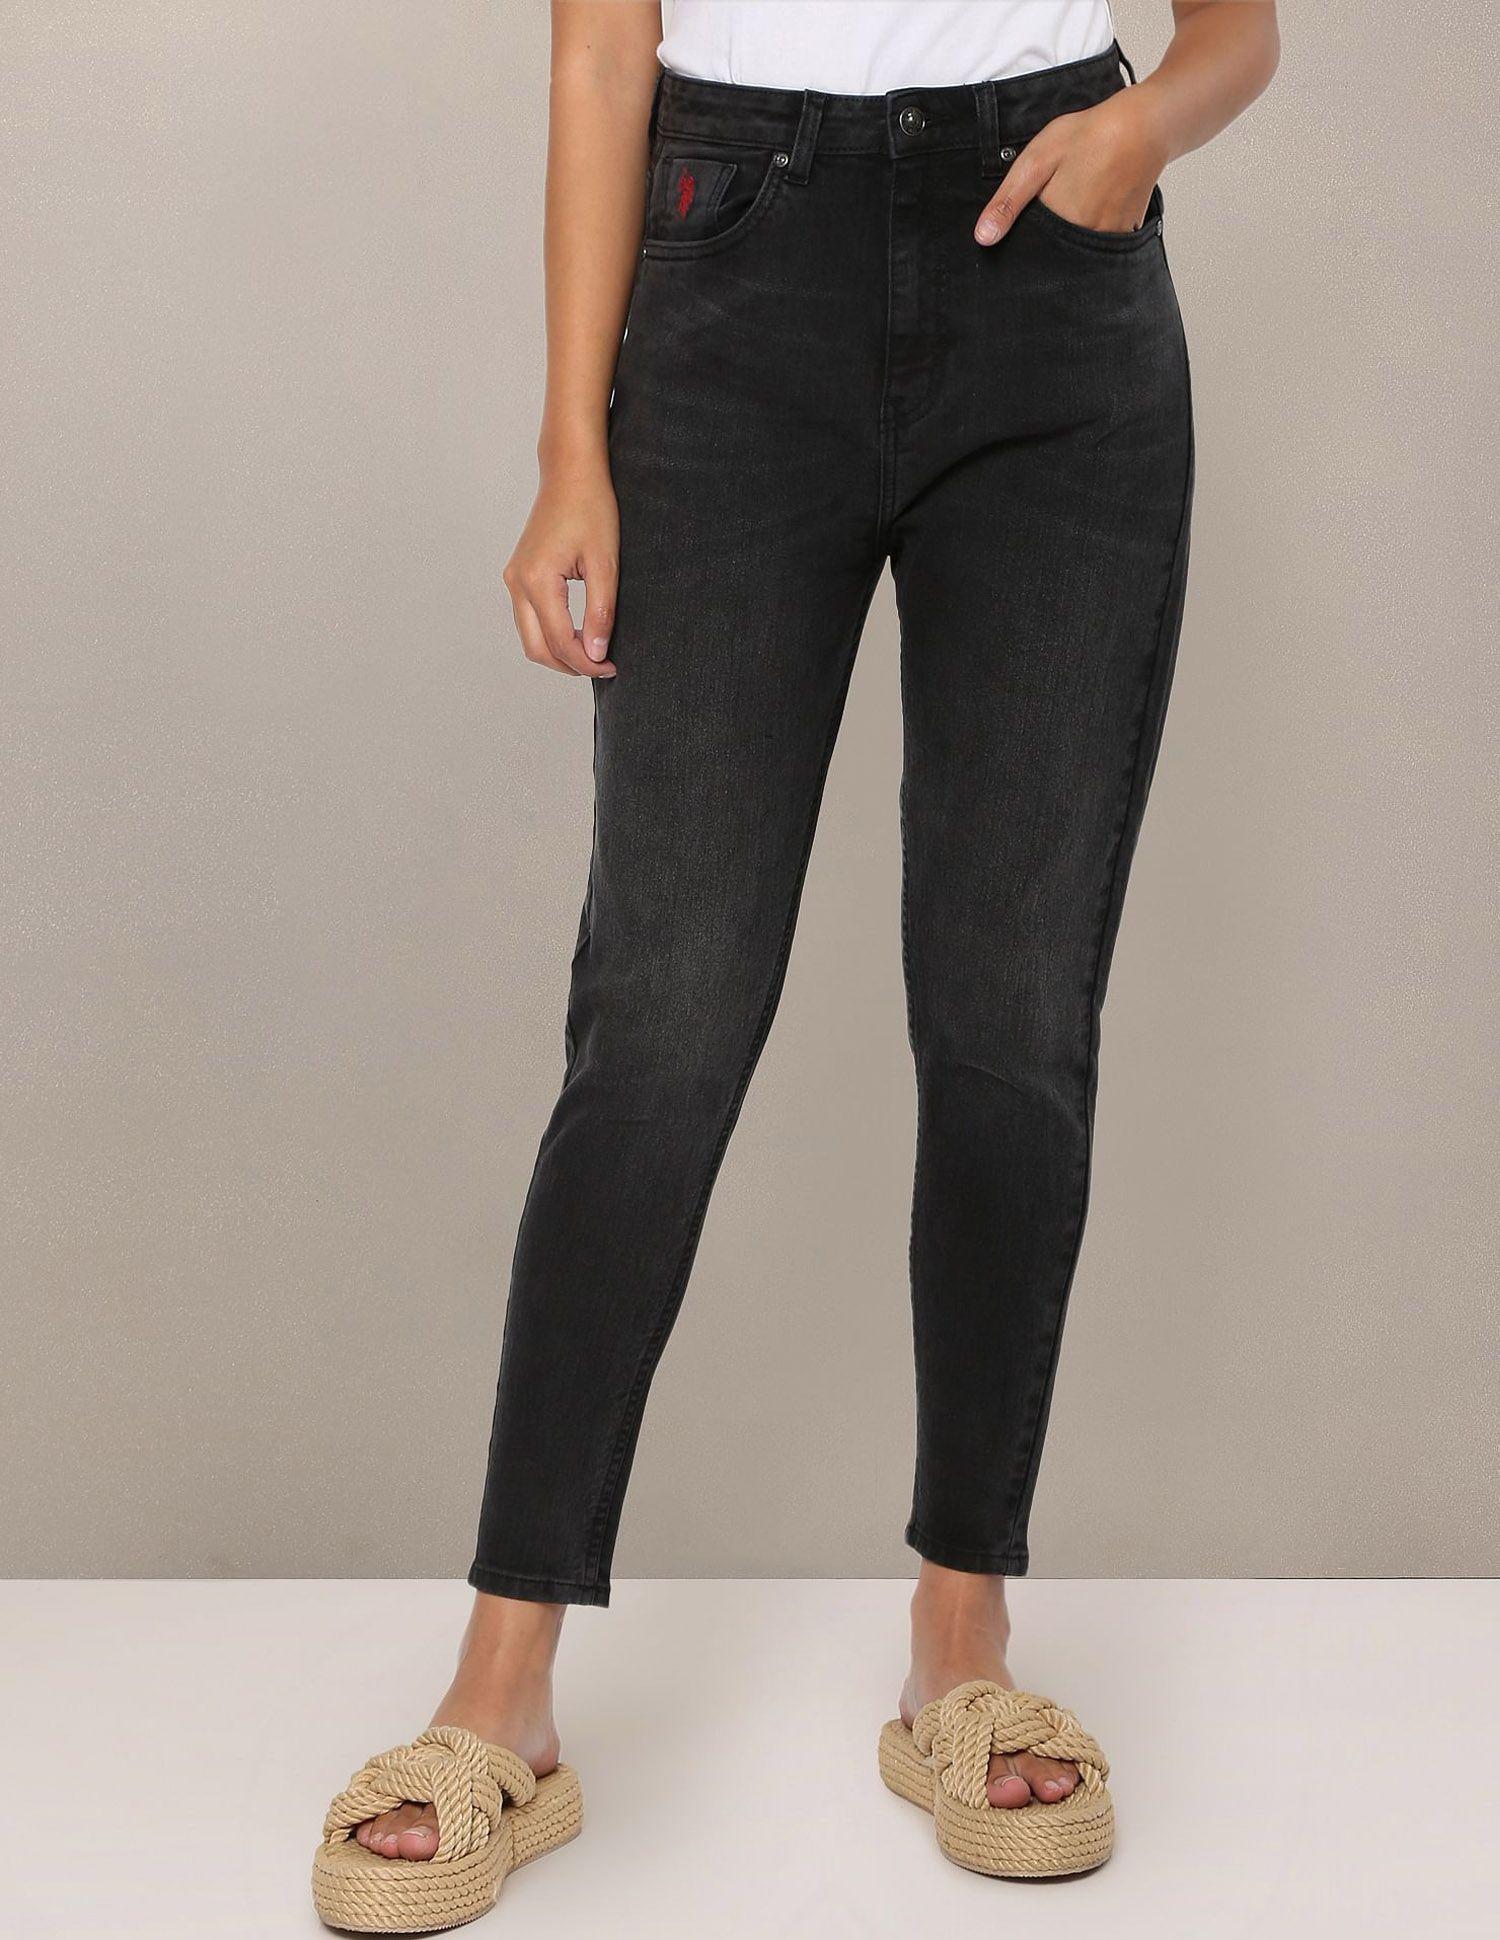 u.s. polo assn. women high-rise stretchable jeans